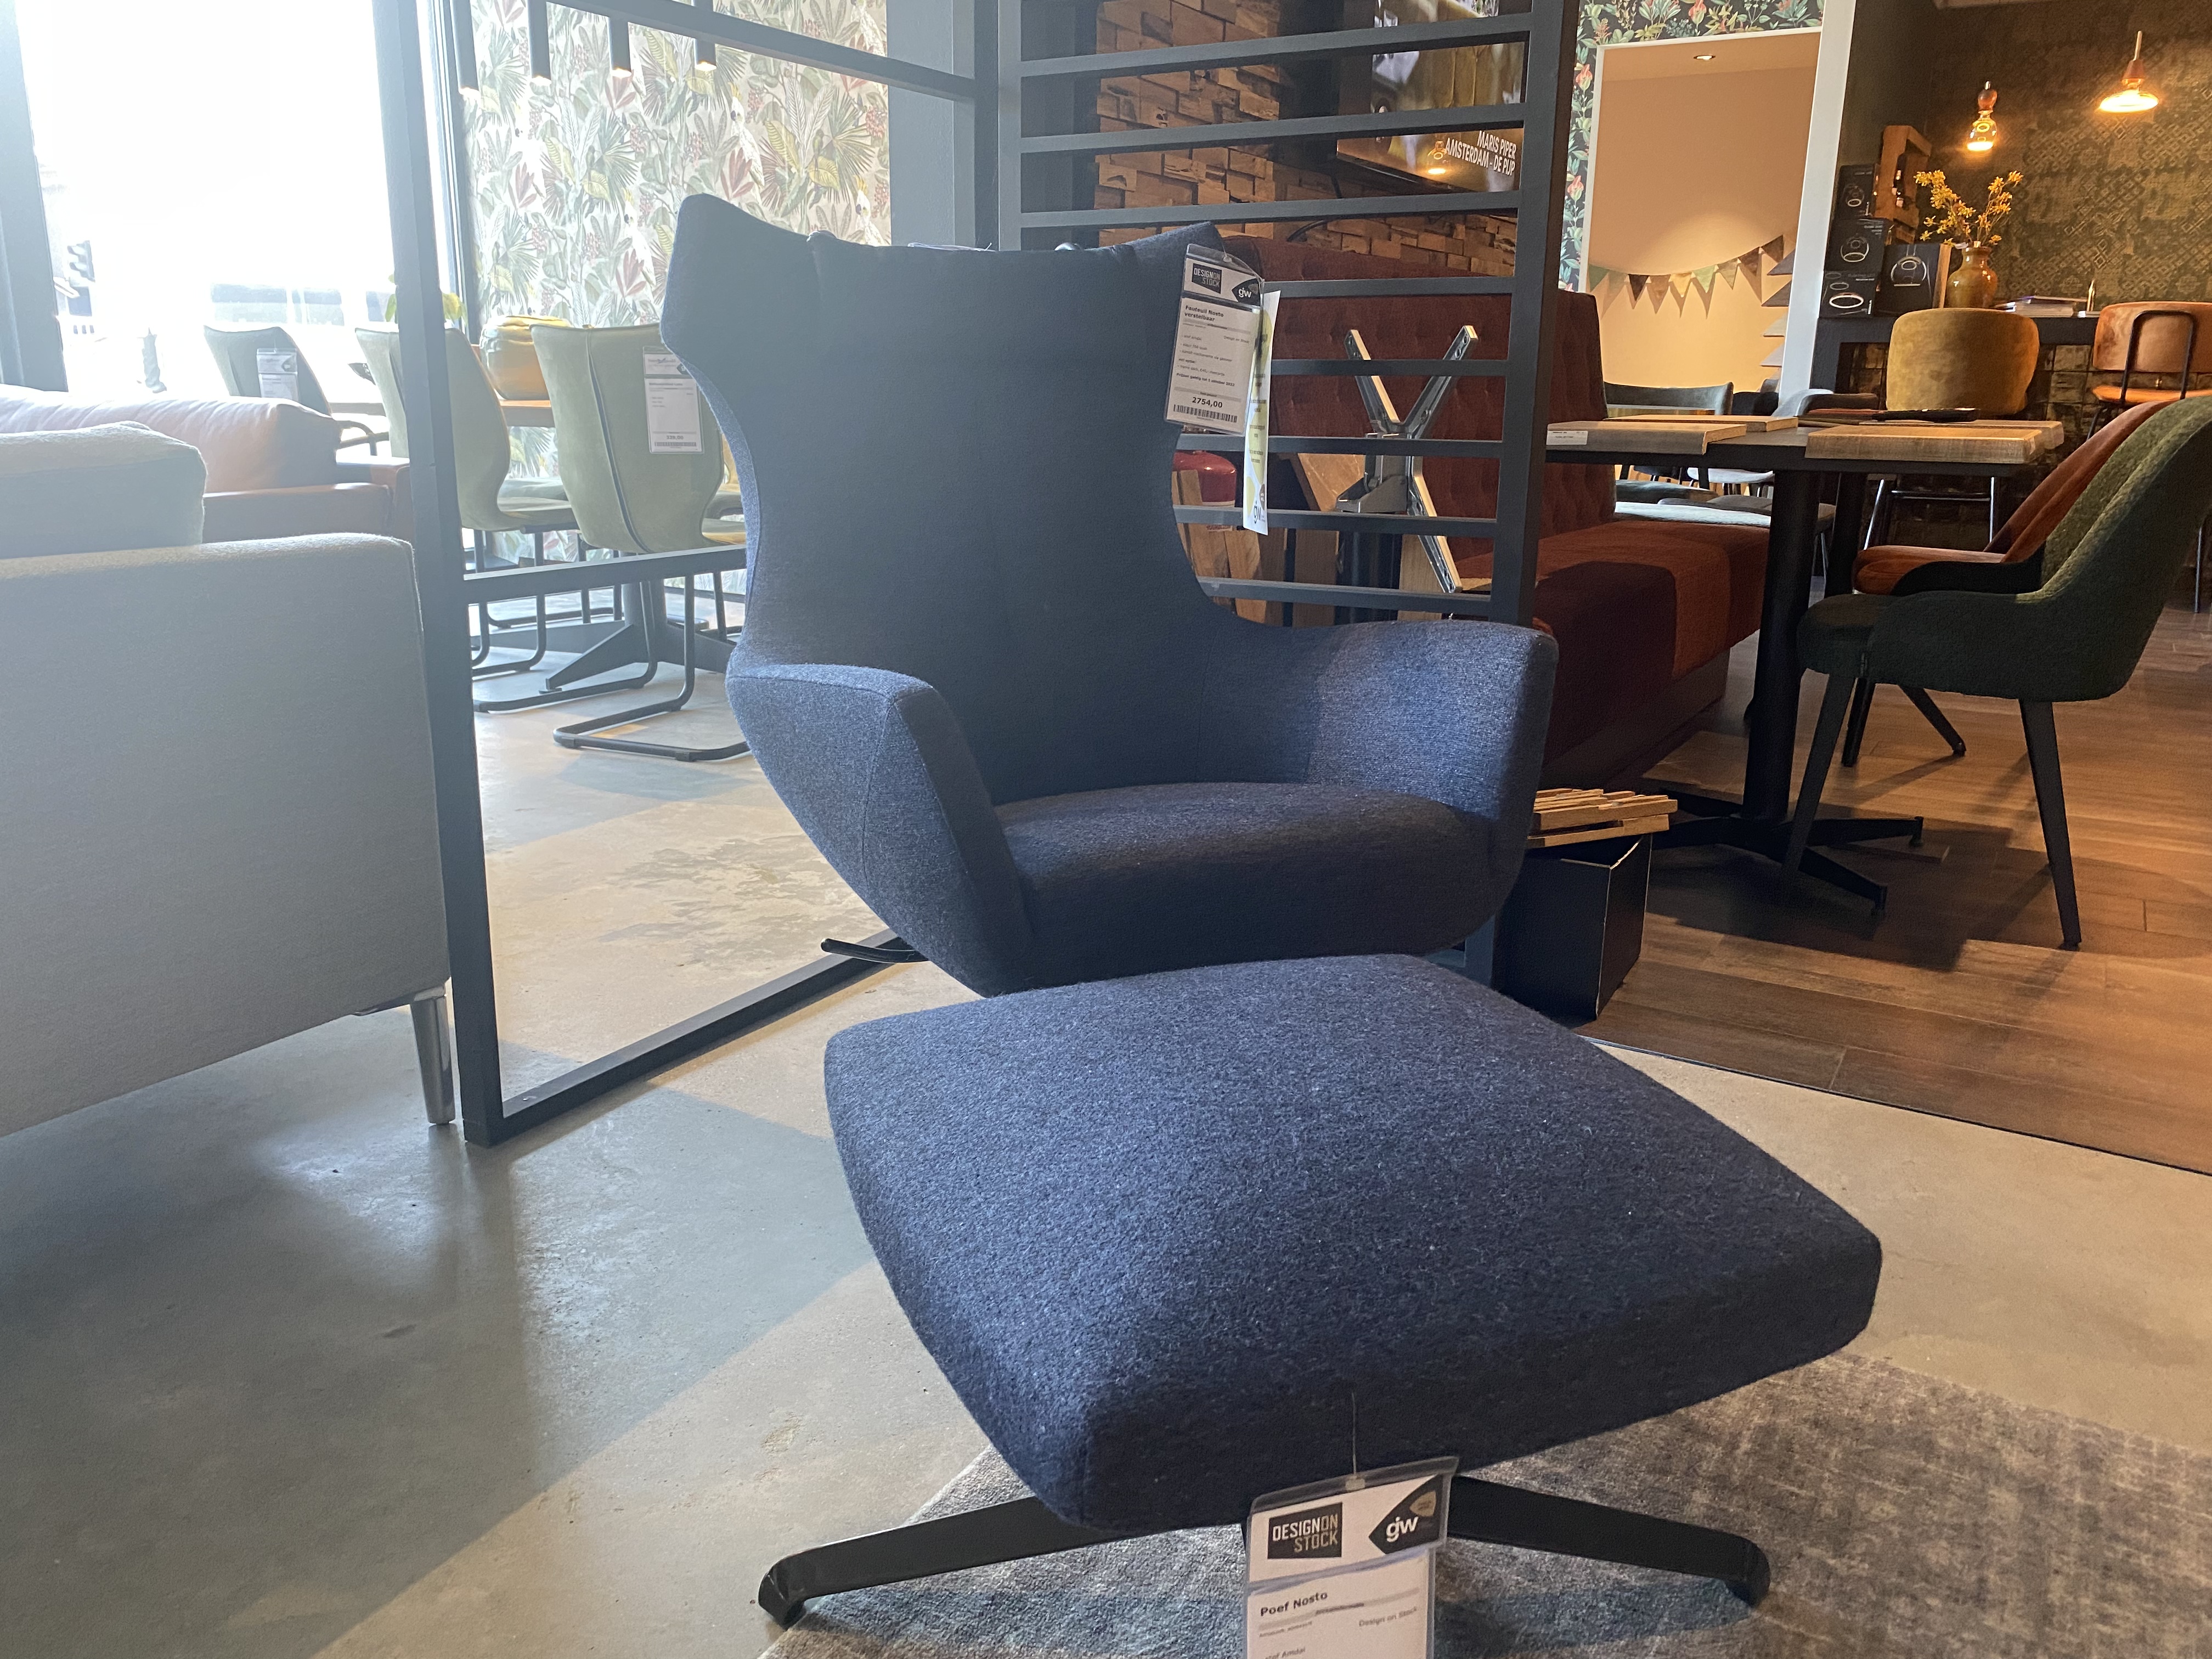 Afbeelding SALE - Design on stock fauteuil Nosto 3 delig 1